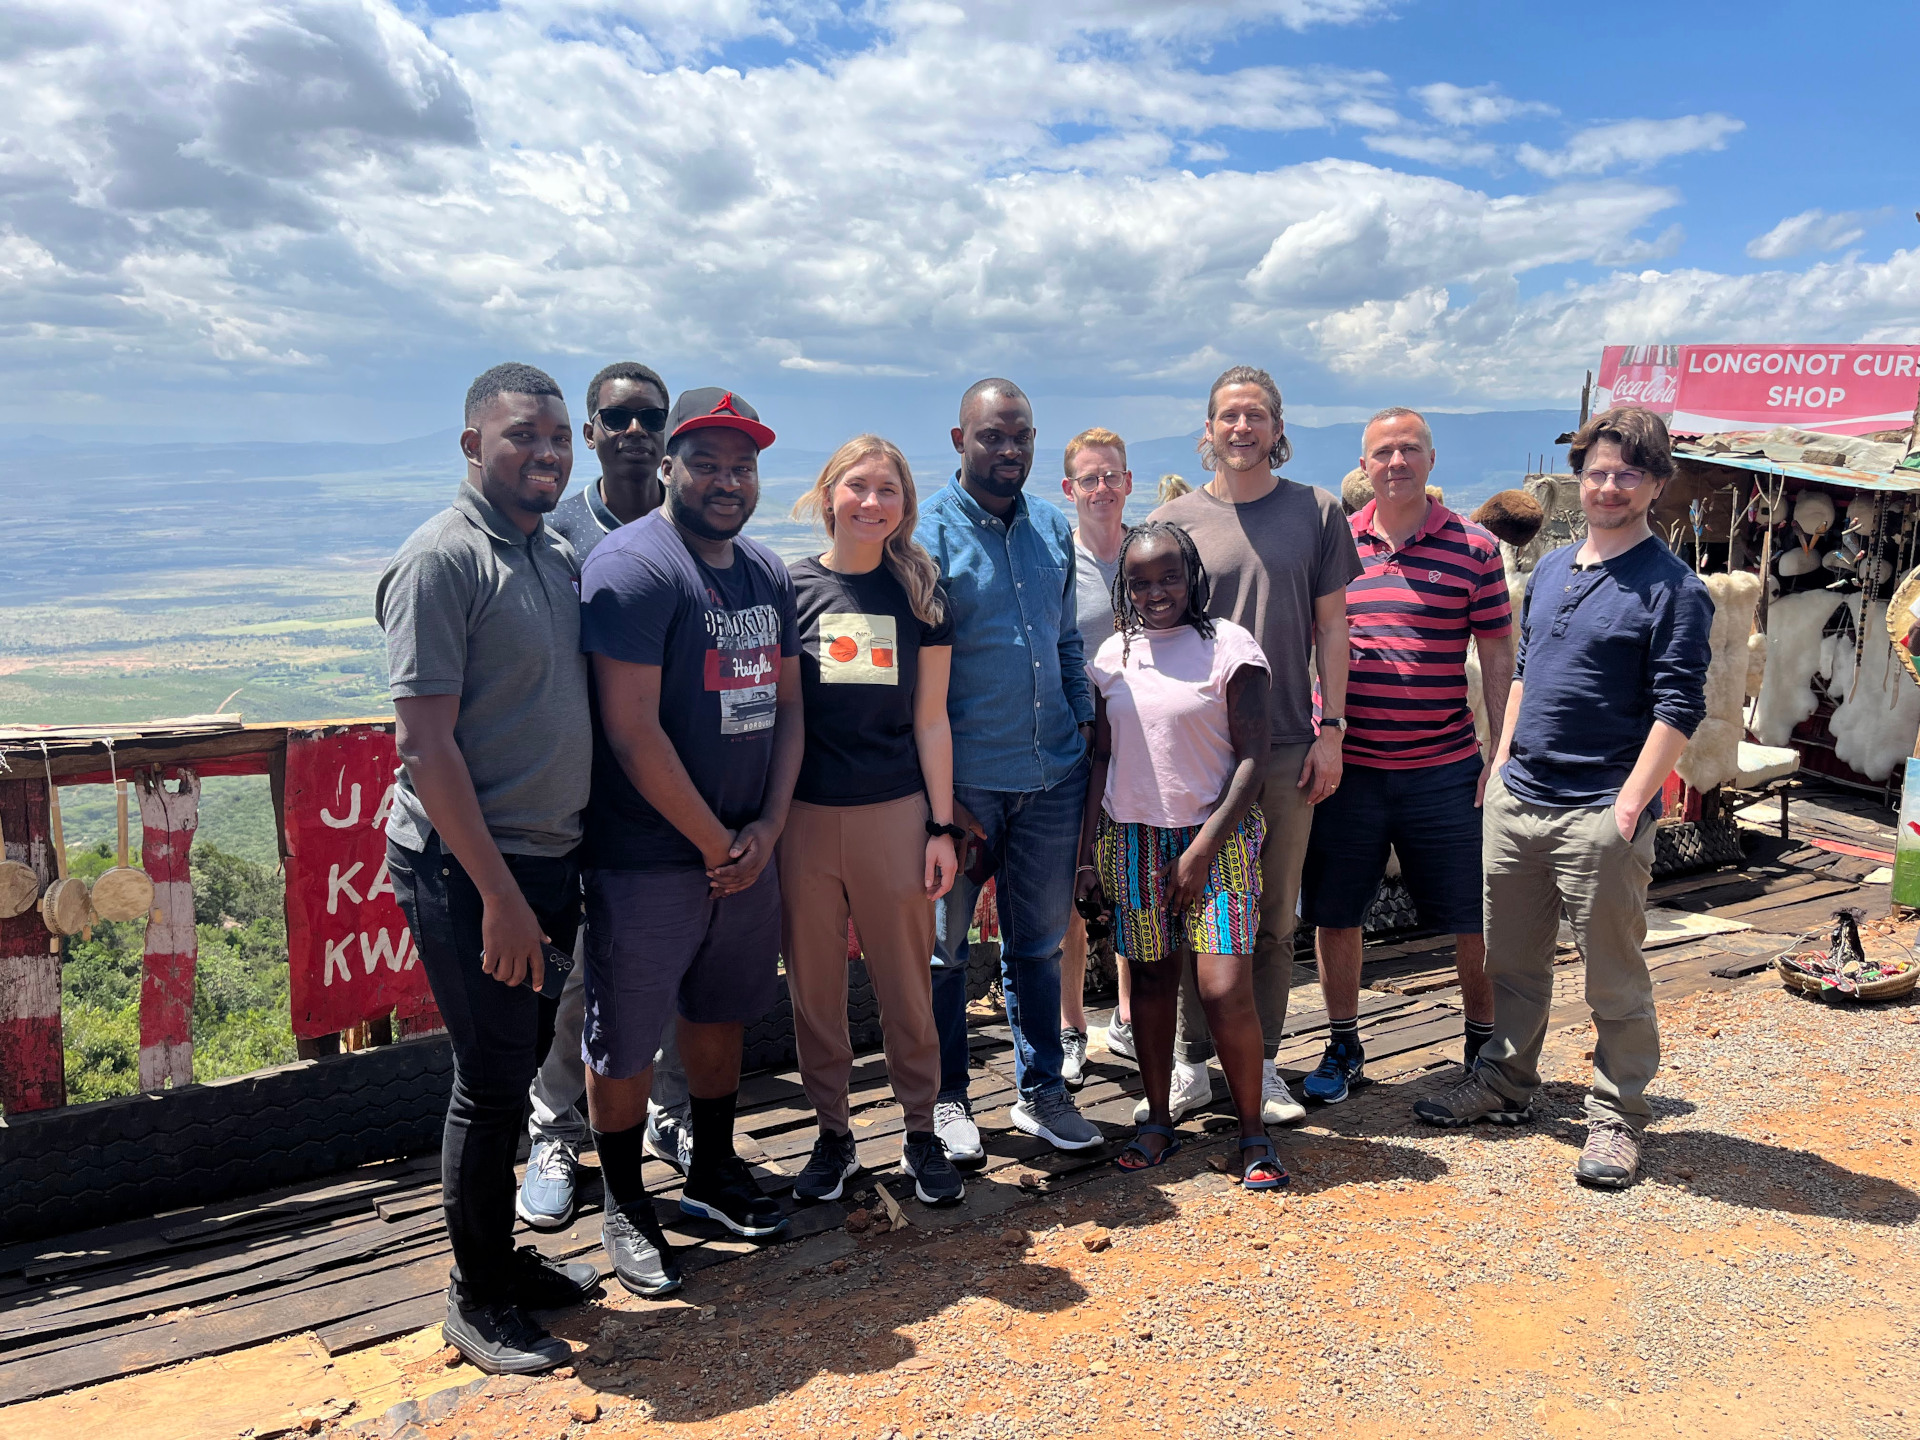 Most of the OpenFn team overlooking the Great Rift Valley